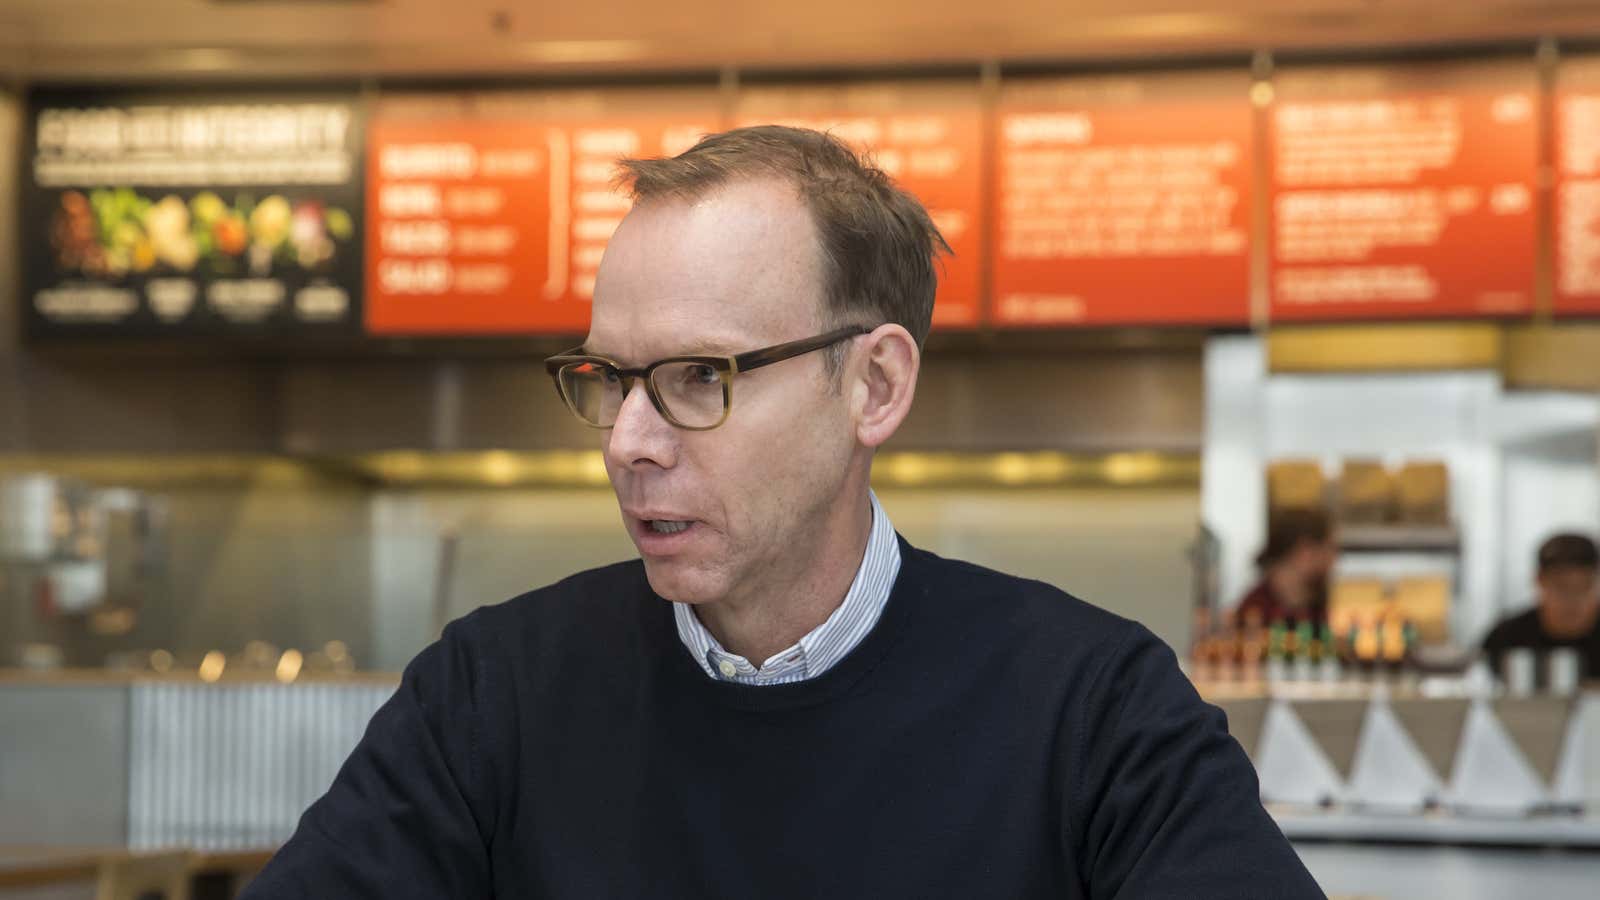 Chipotle founder and CEO Steve Ells.